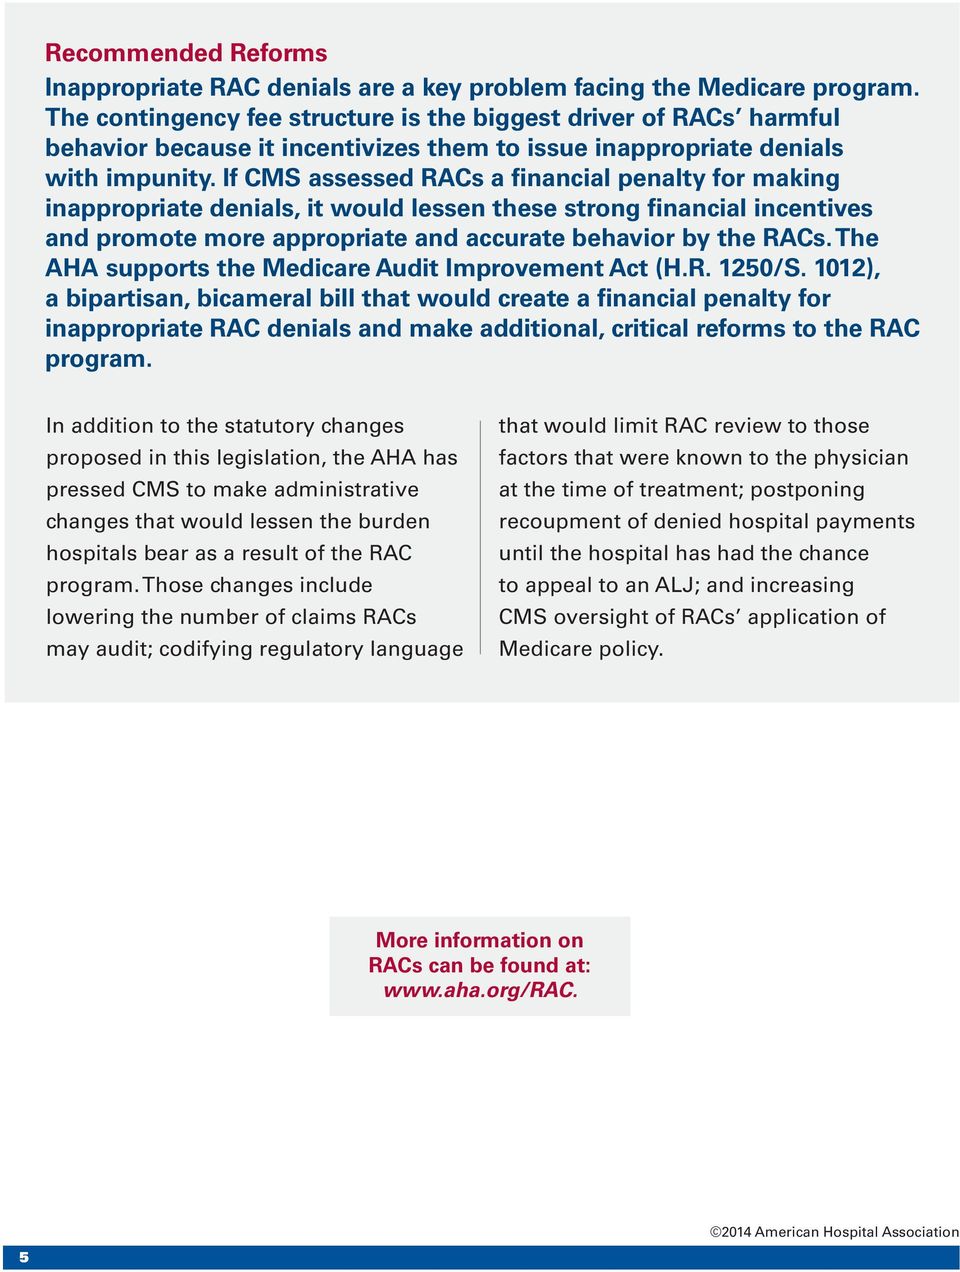 If CMS assessed RACs a financial penalty for making inappropriate denials, it would lessen these strong financial incentives and promote more appropriate and accurate behavior by the RACs.